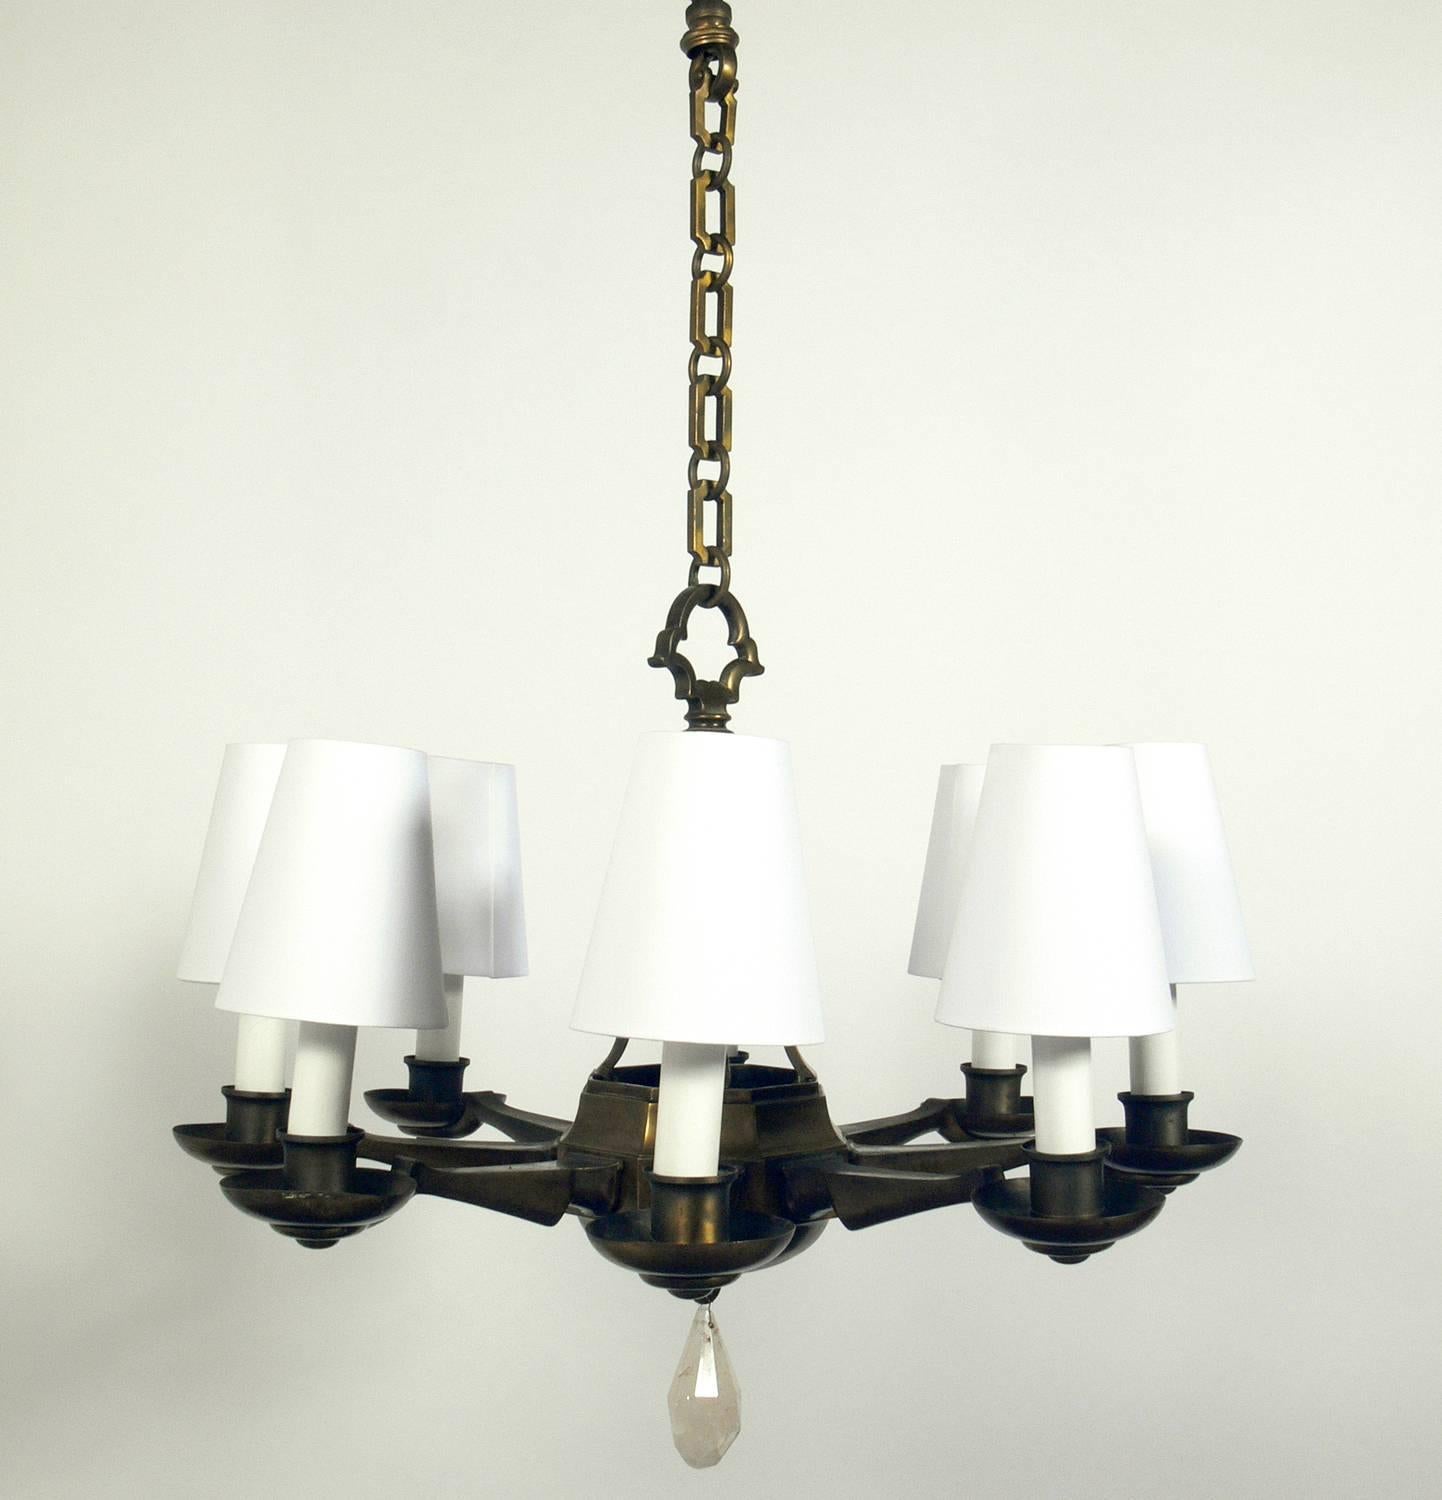 Elegant brass and rock crystal chandelier, American, circa 1920s. It has been rewired and is ready to use. The shades and candle sleeves are all new and included in the price noted below.